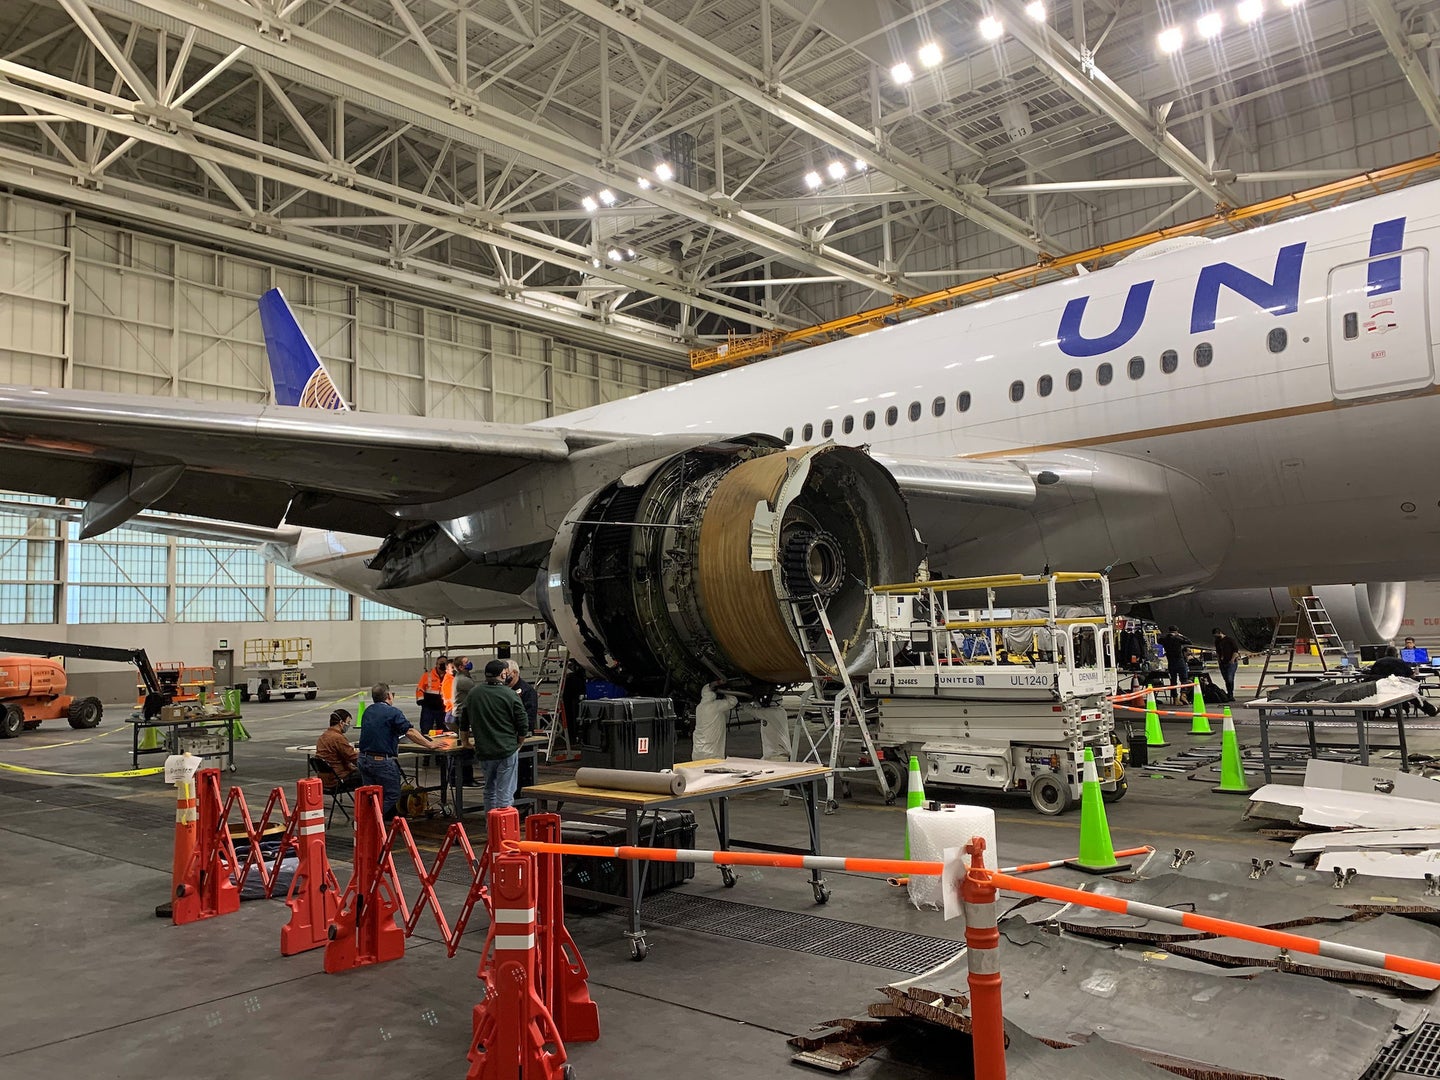 Boeing's damaged 777-200 parked in a hanger following an incident with its engine on Flight 328 on February 20.